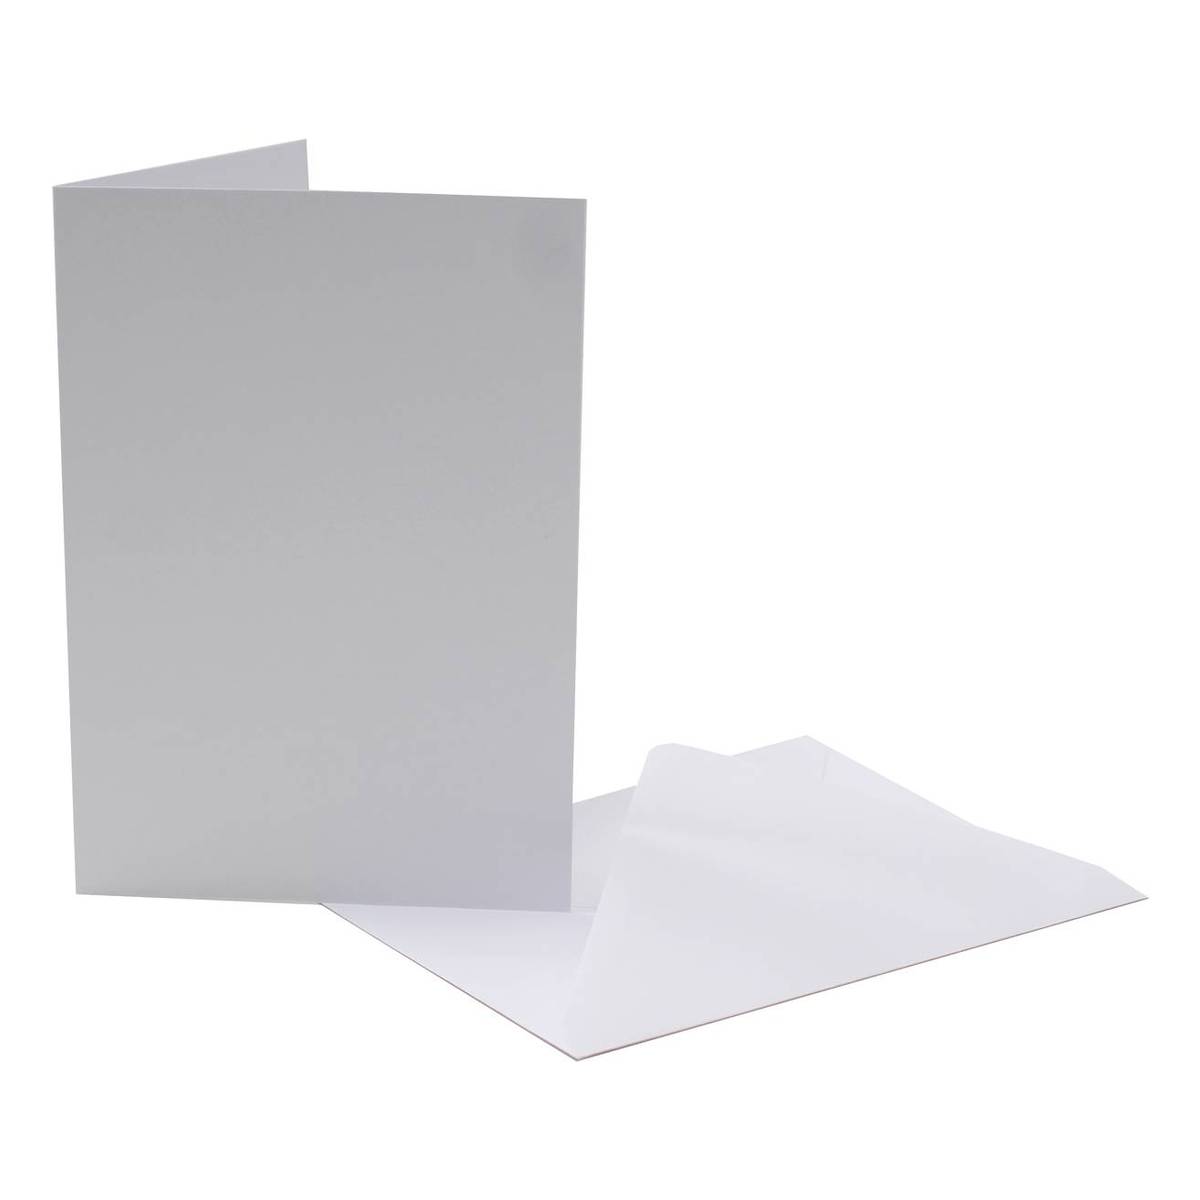 6 x Greeting Cards Blank Gold or Silver Foiled 5 x 5" Single Fold Scored 6 Env 